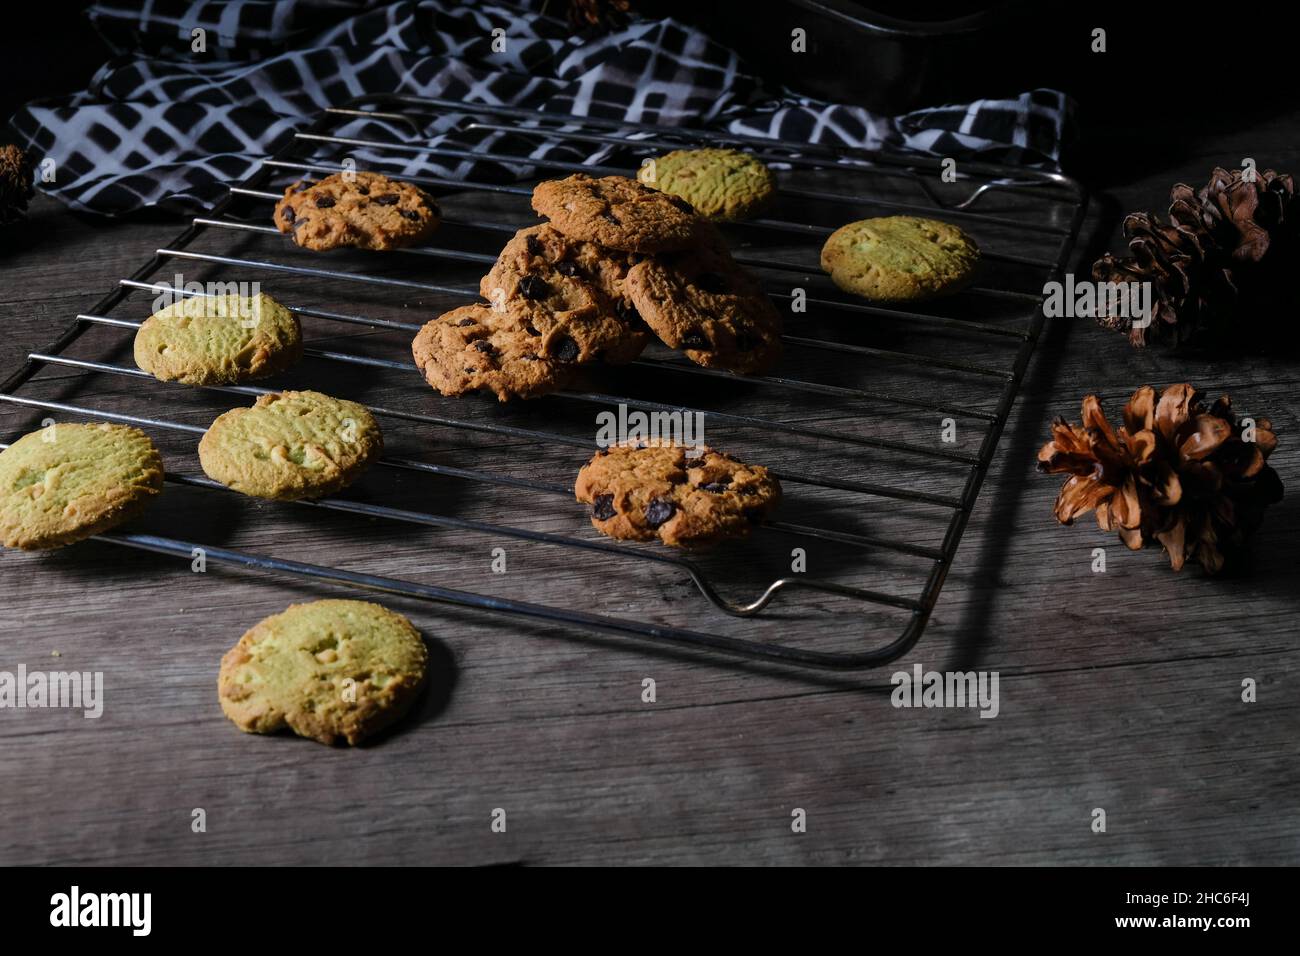 Chocolate cookies, on a cooling tray, photo of dark shades - dark mood Stock Photo